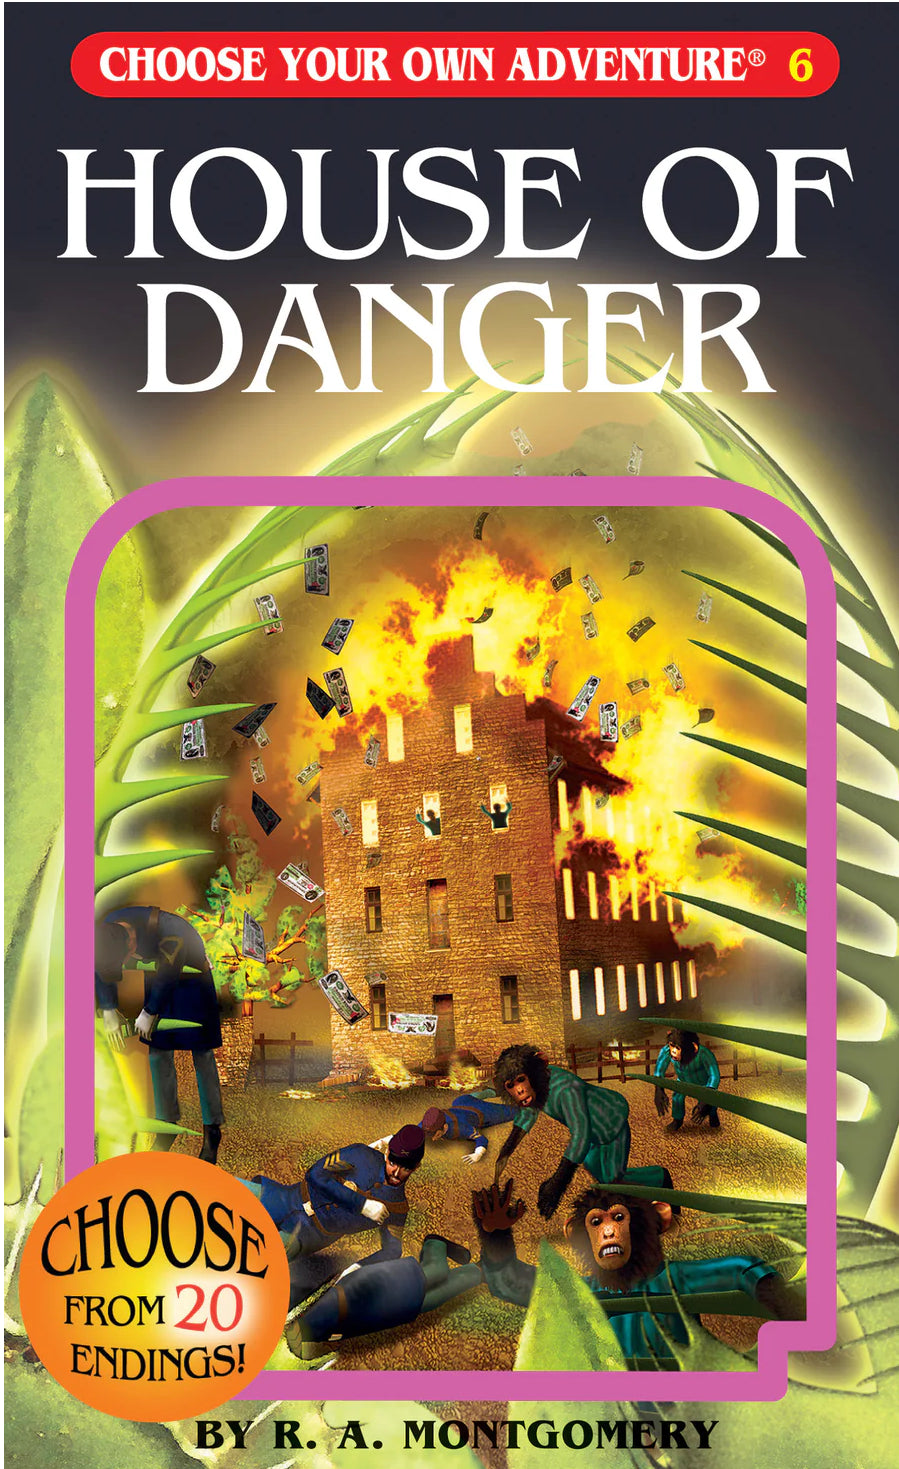 Choose Your Own Adventure- House of Danger